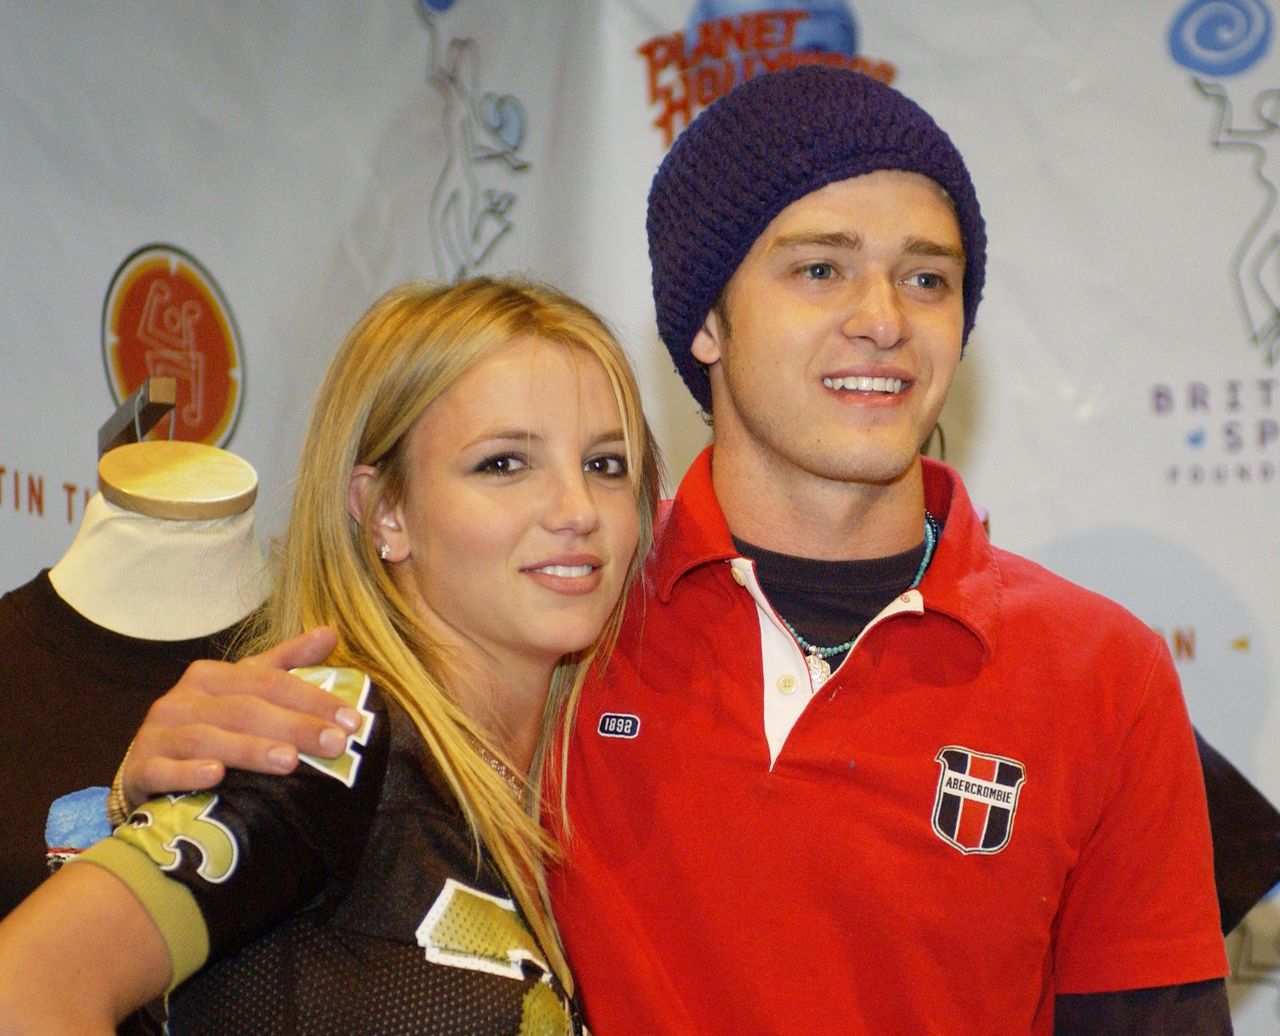 Britney Spears and Justin Timberlake broke up in 2002.